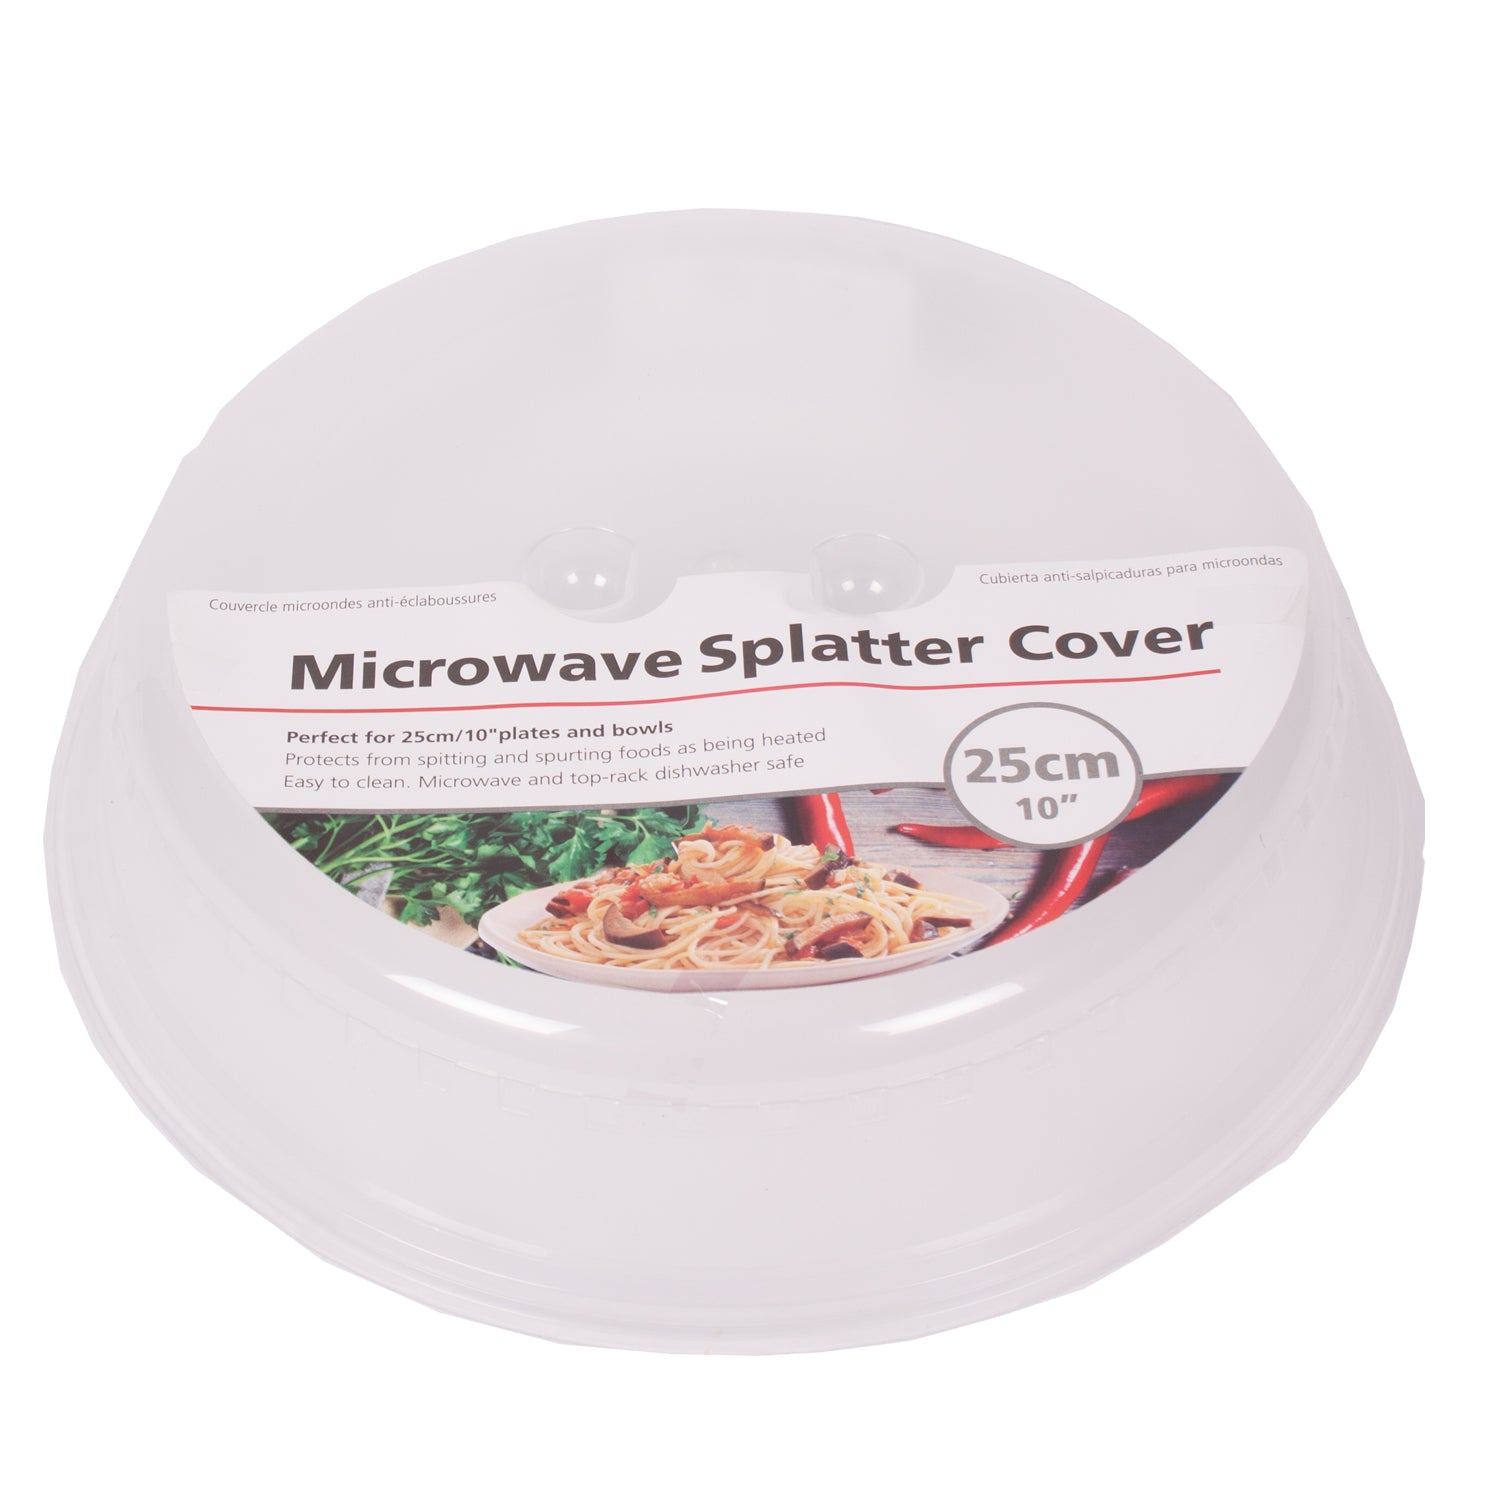 Nordic Ware 10 Microwave Splatter Cover, Clear, 65005W15